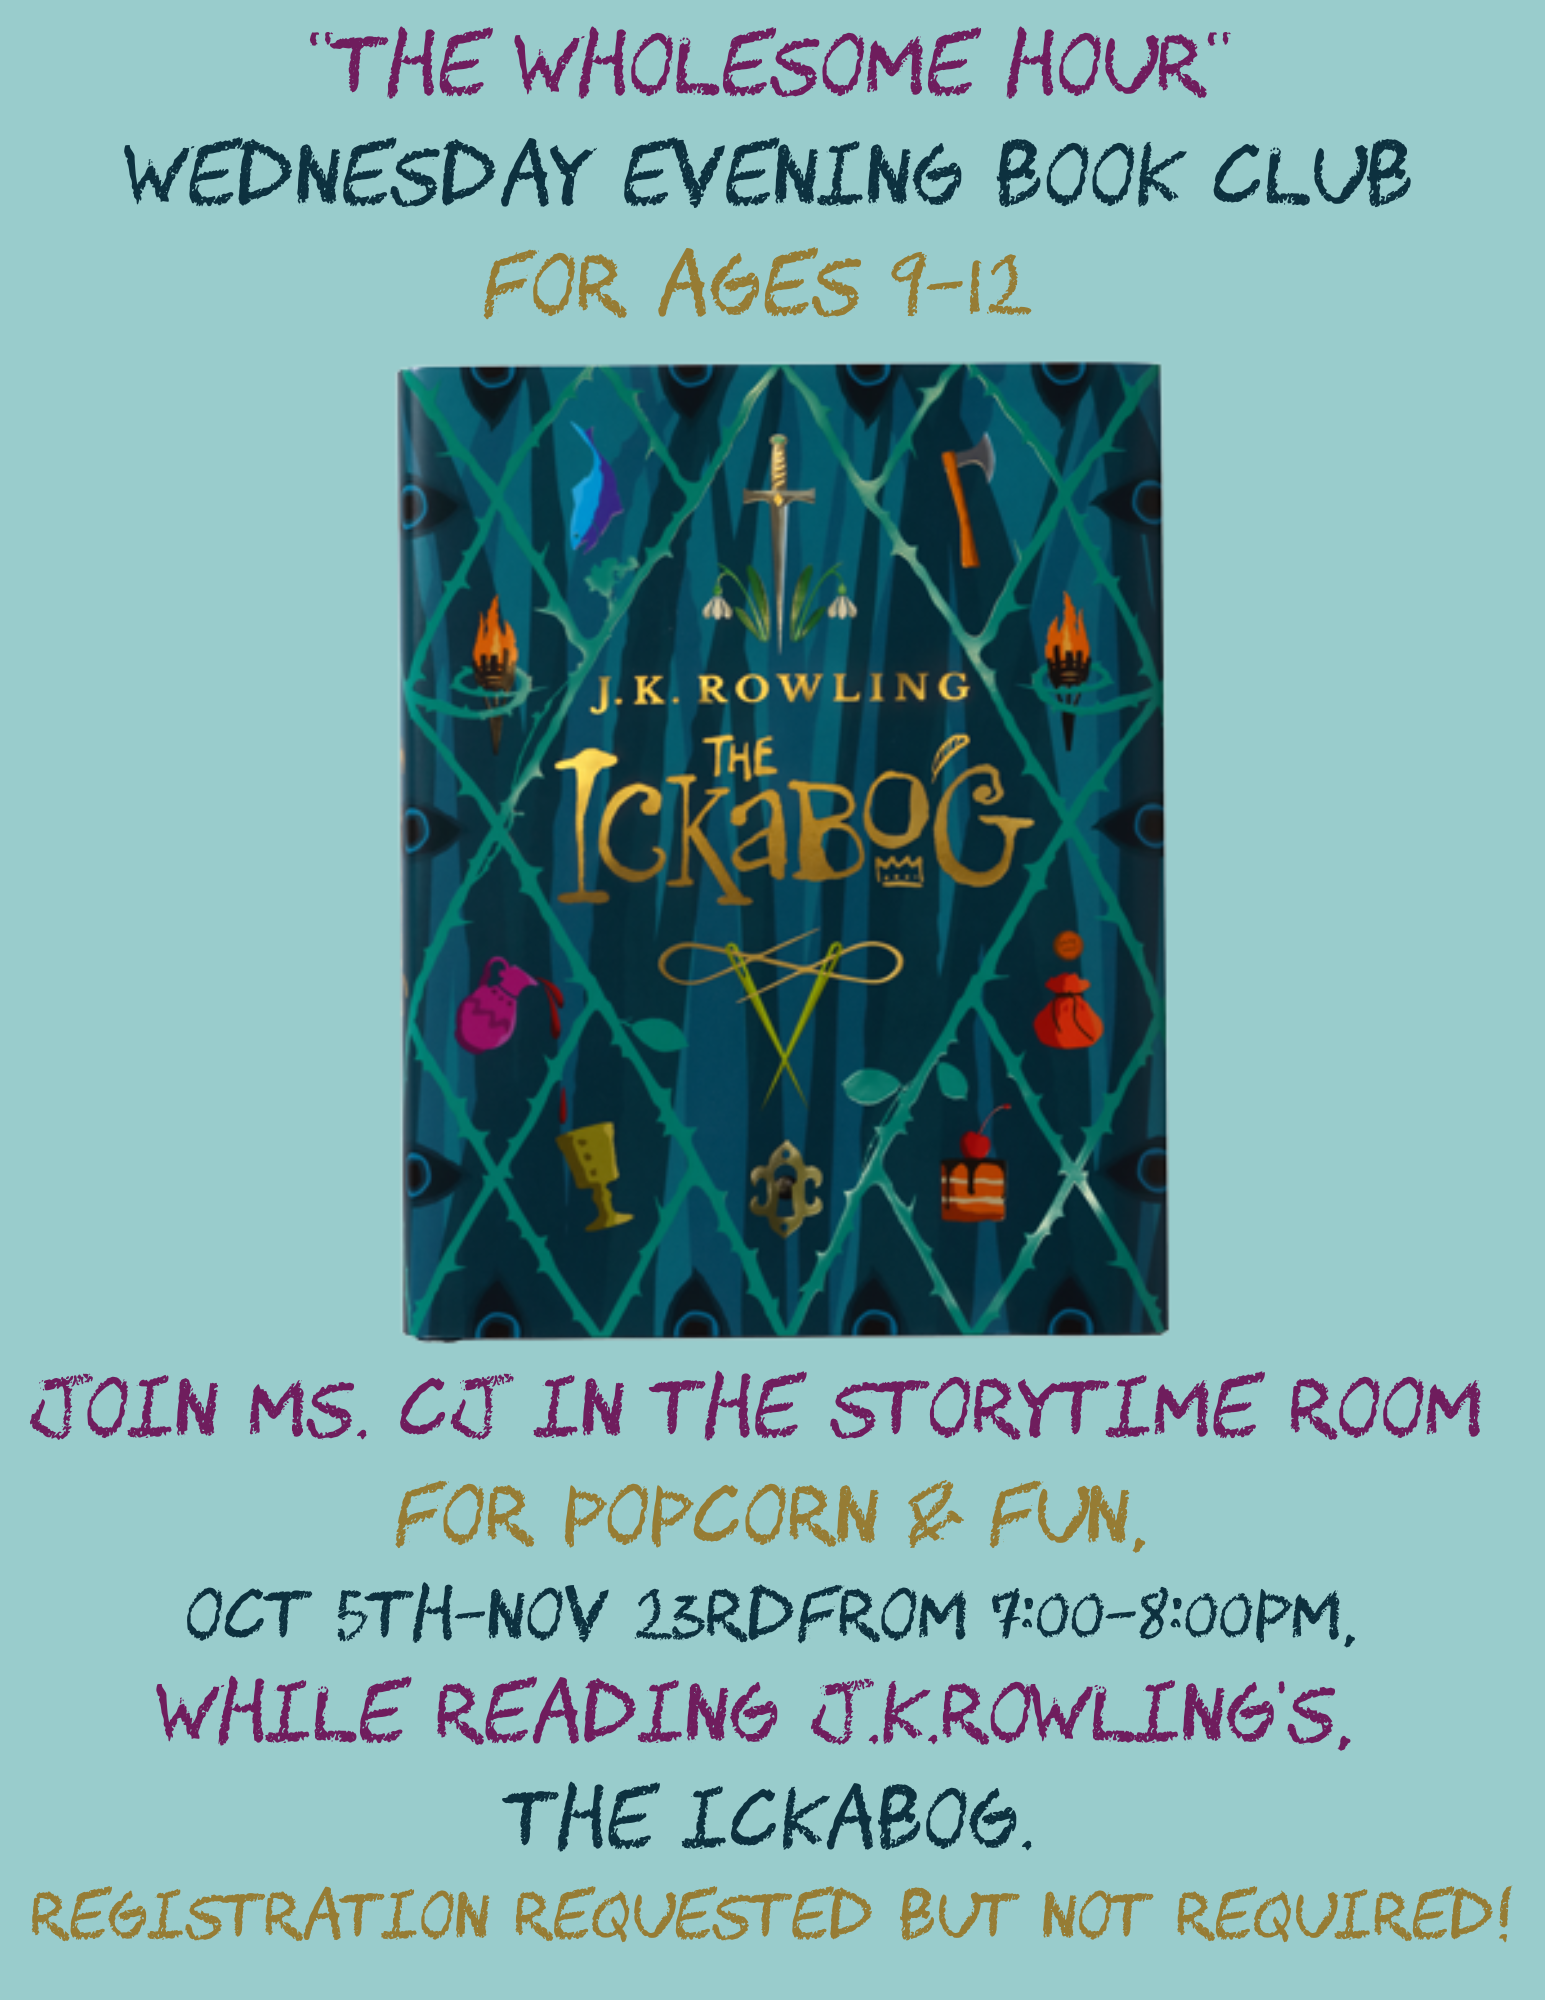 New Book Club Ages 9-12